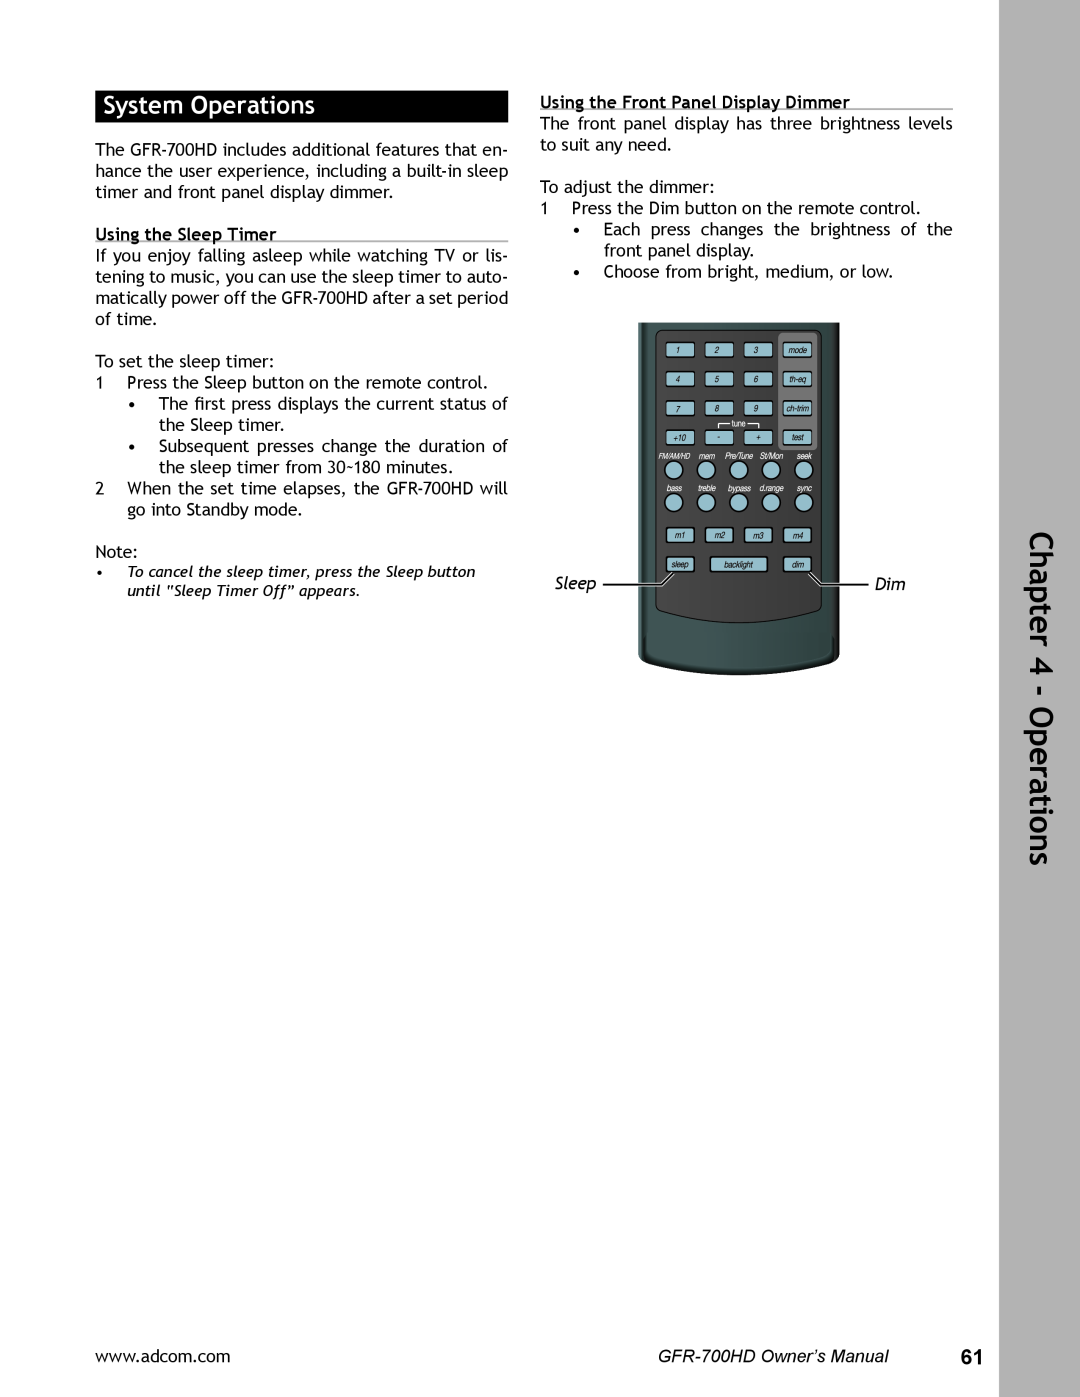 Adcom GFR-700HD user manual System Operations, Using the Sleep Timer, Using the Front Panel Display Dimmer, SleepDim 